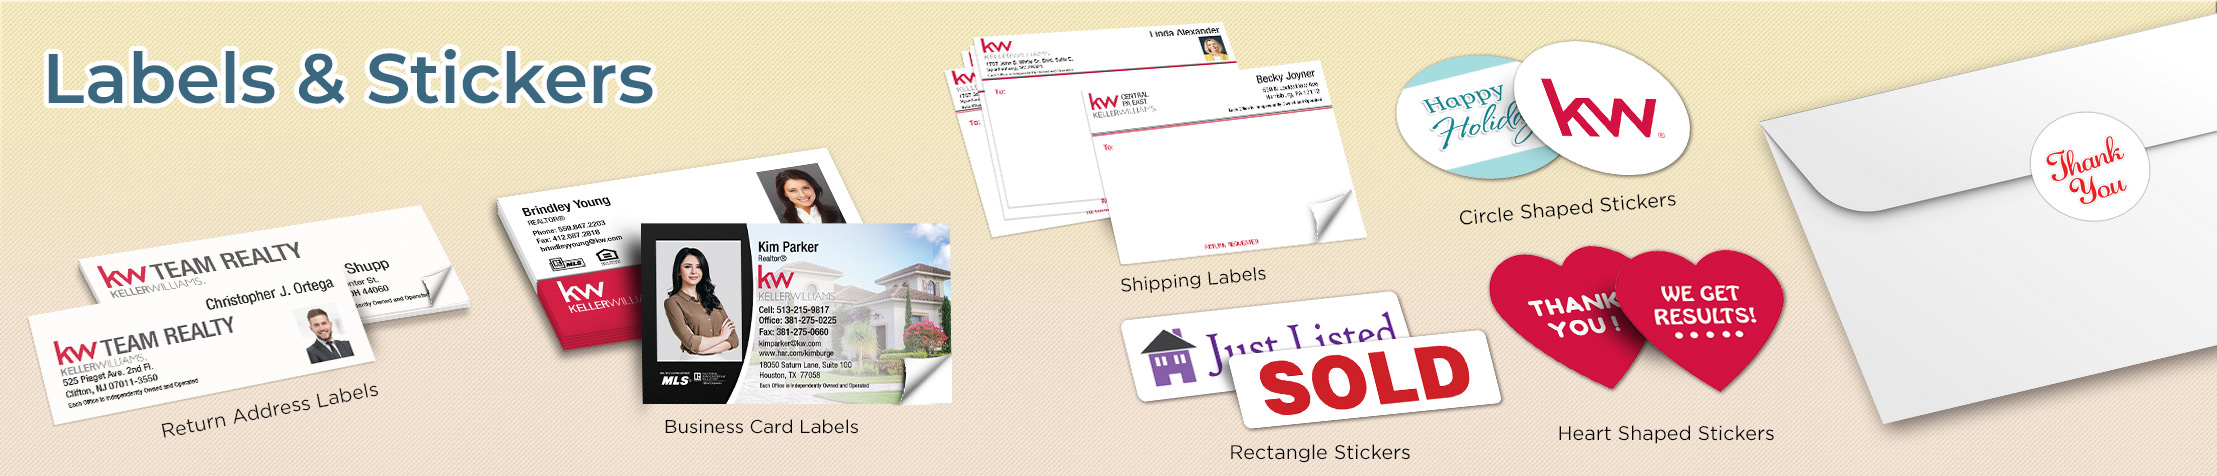 Keller Williams Real Estate Labels and Stickers - KW approved vendor business card labels, return address labels, shipping labels, and assorted stickers | BestPrintBuy.com